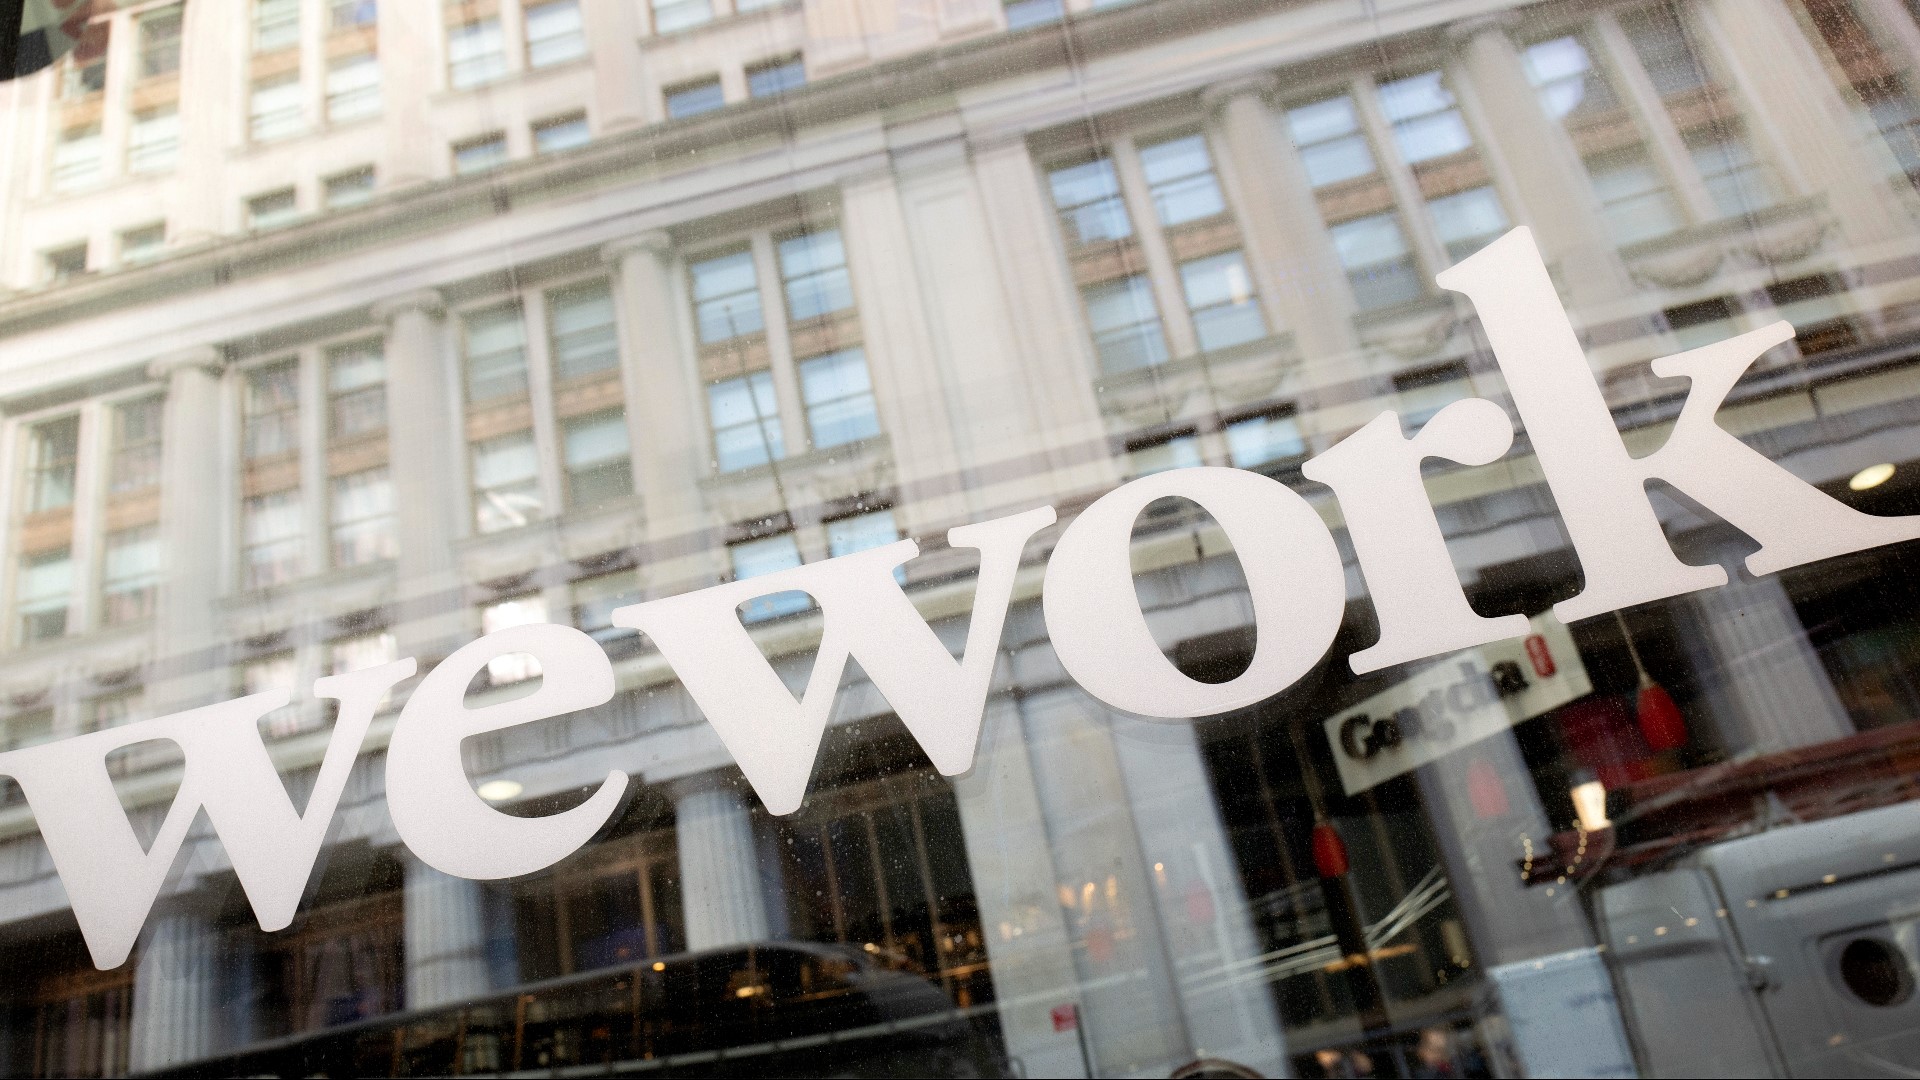 WeWork shares tanked by nearly 50% on Wednesday amid reports that they plan to file for bankruptcy.